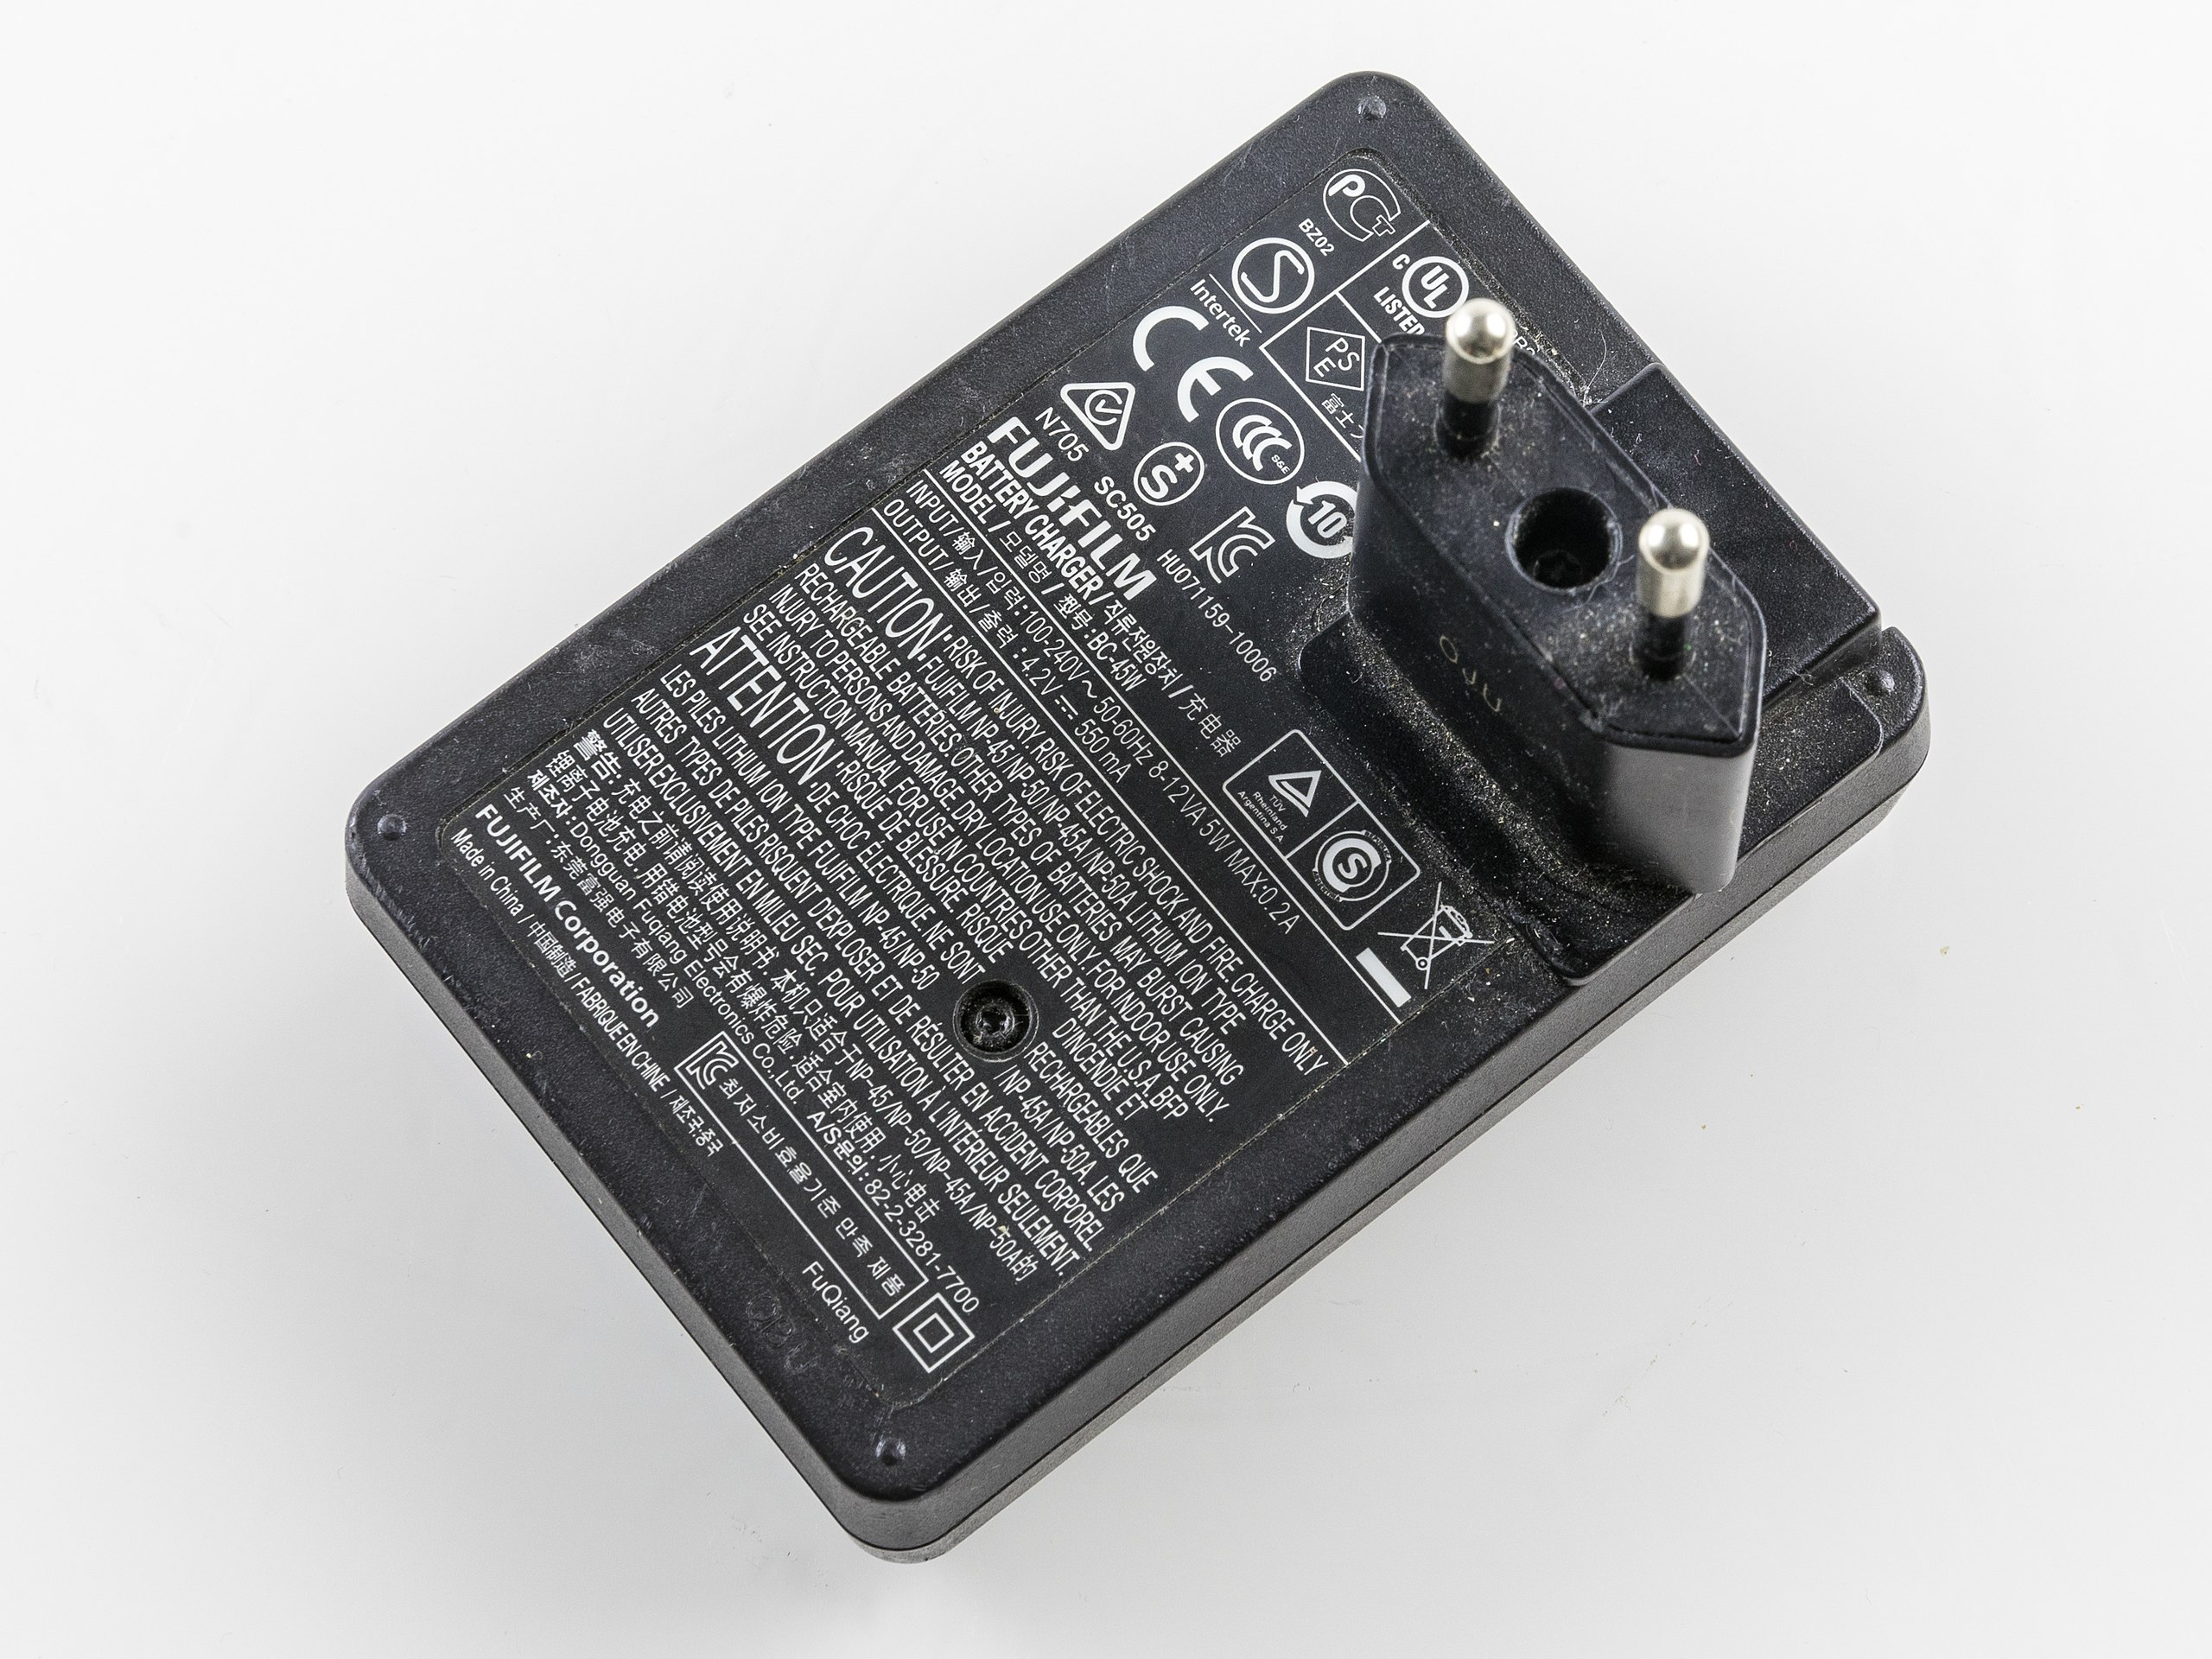 File:Fujifilm Battery Charger BC-45W-9863.jpg - Wikimedia Commons